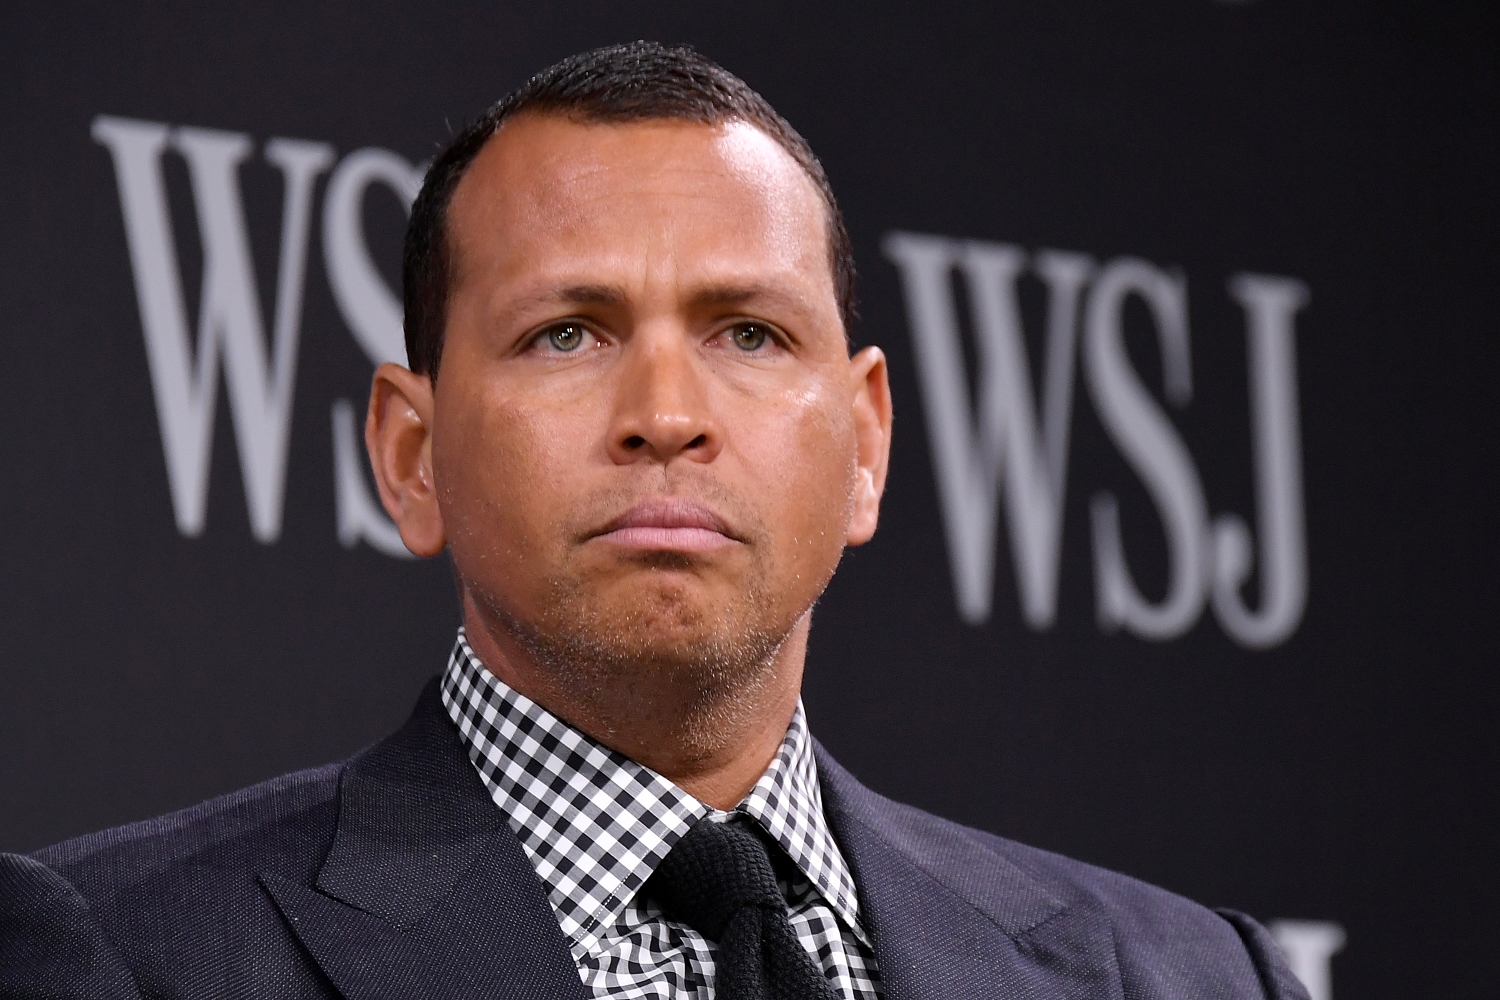 Sports commentator and former professional baseball player Alex Rodriguez takes part in a panel during WSJ's The Future of Everything Festival at Spring Studios on May 8, 2018.